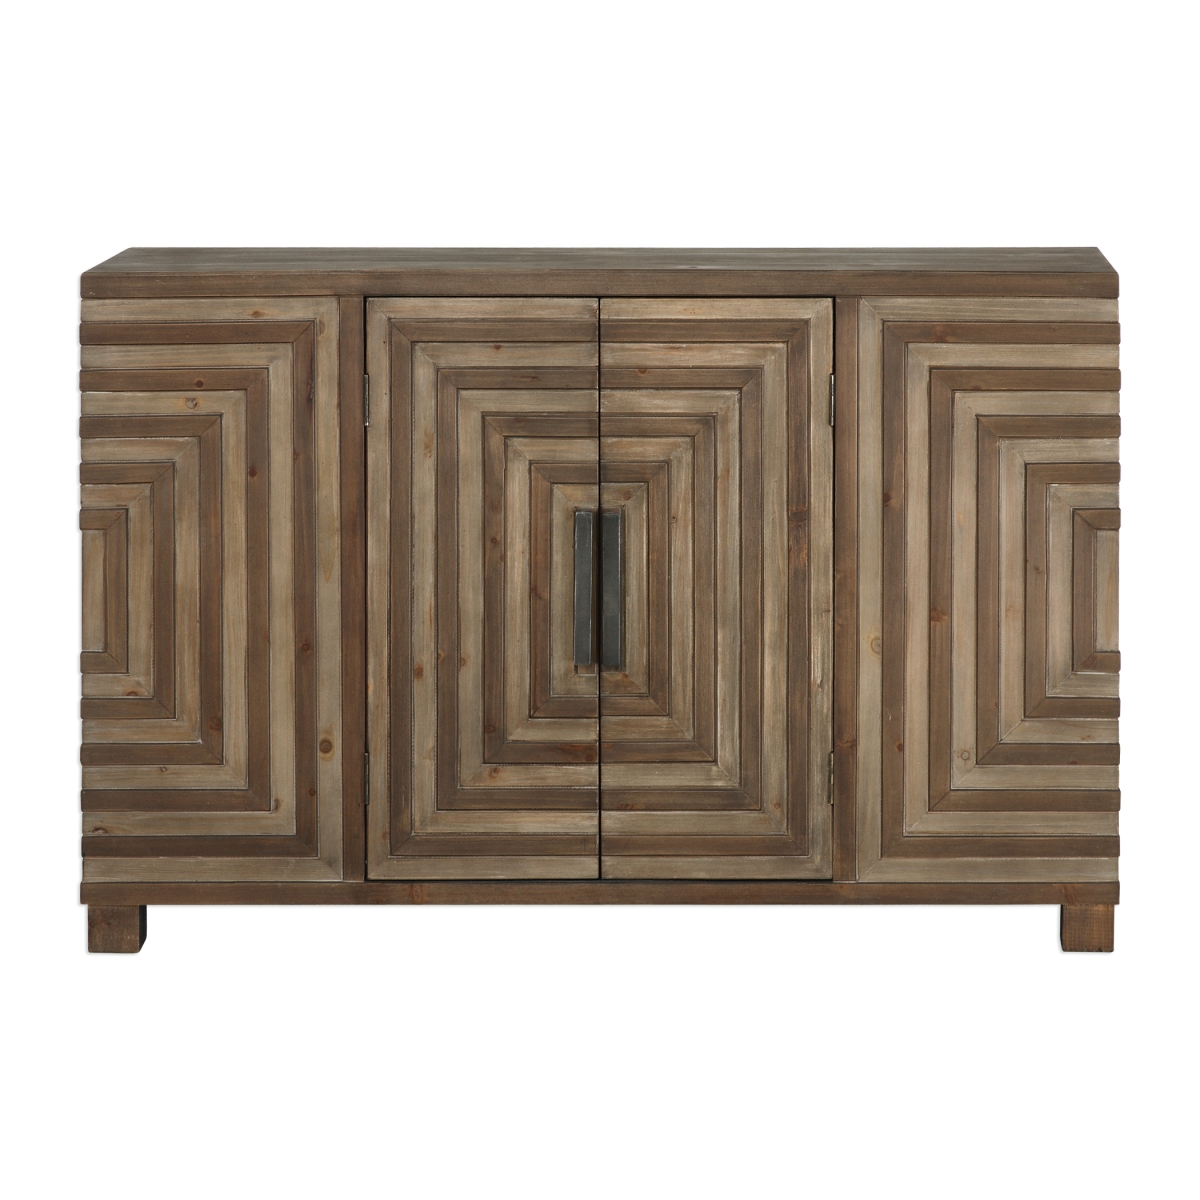 Picture of 212 Main 24773 Layton Geometric Console Cabinet